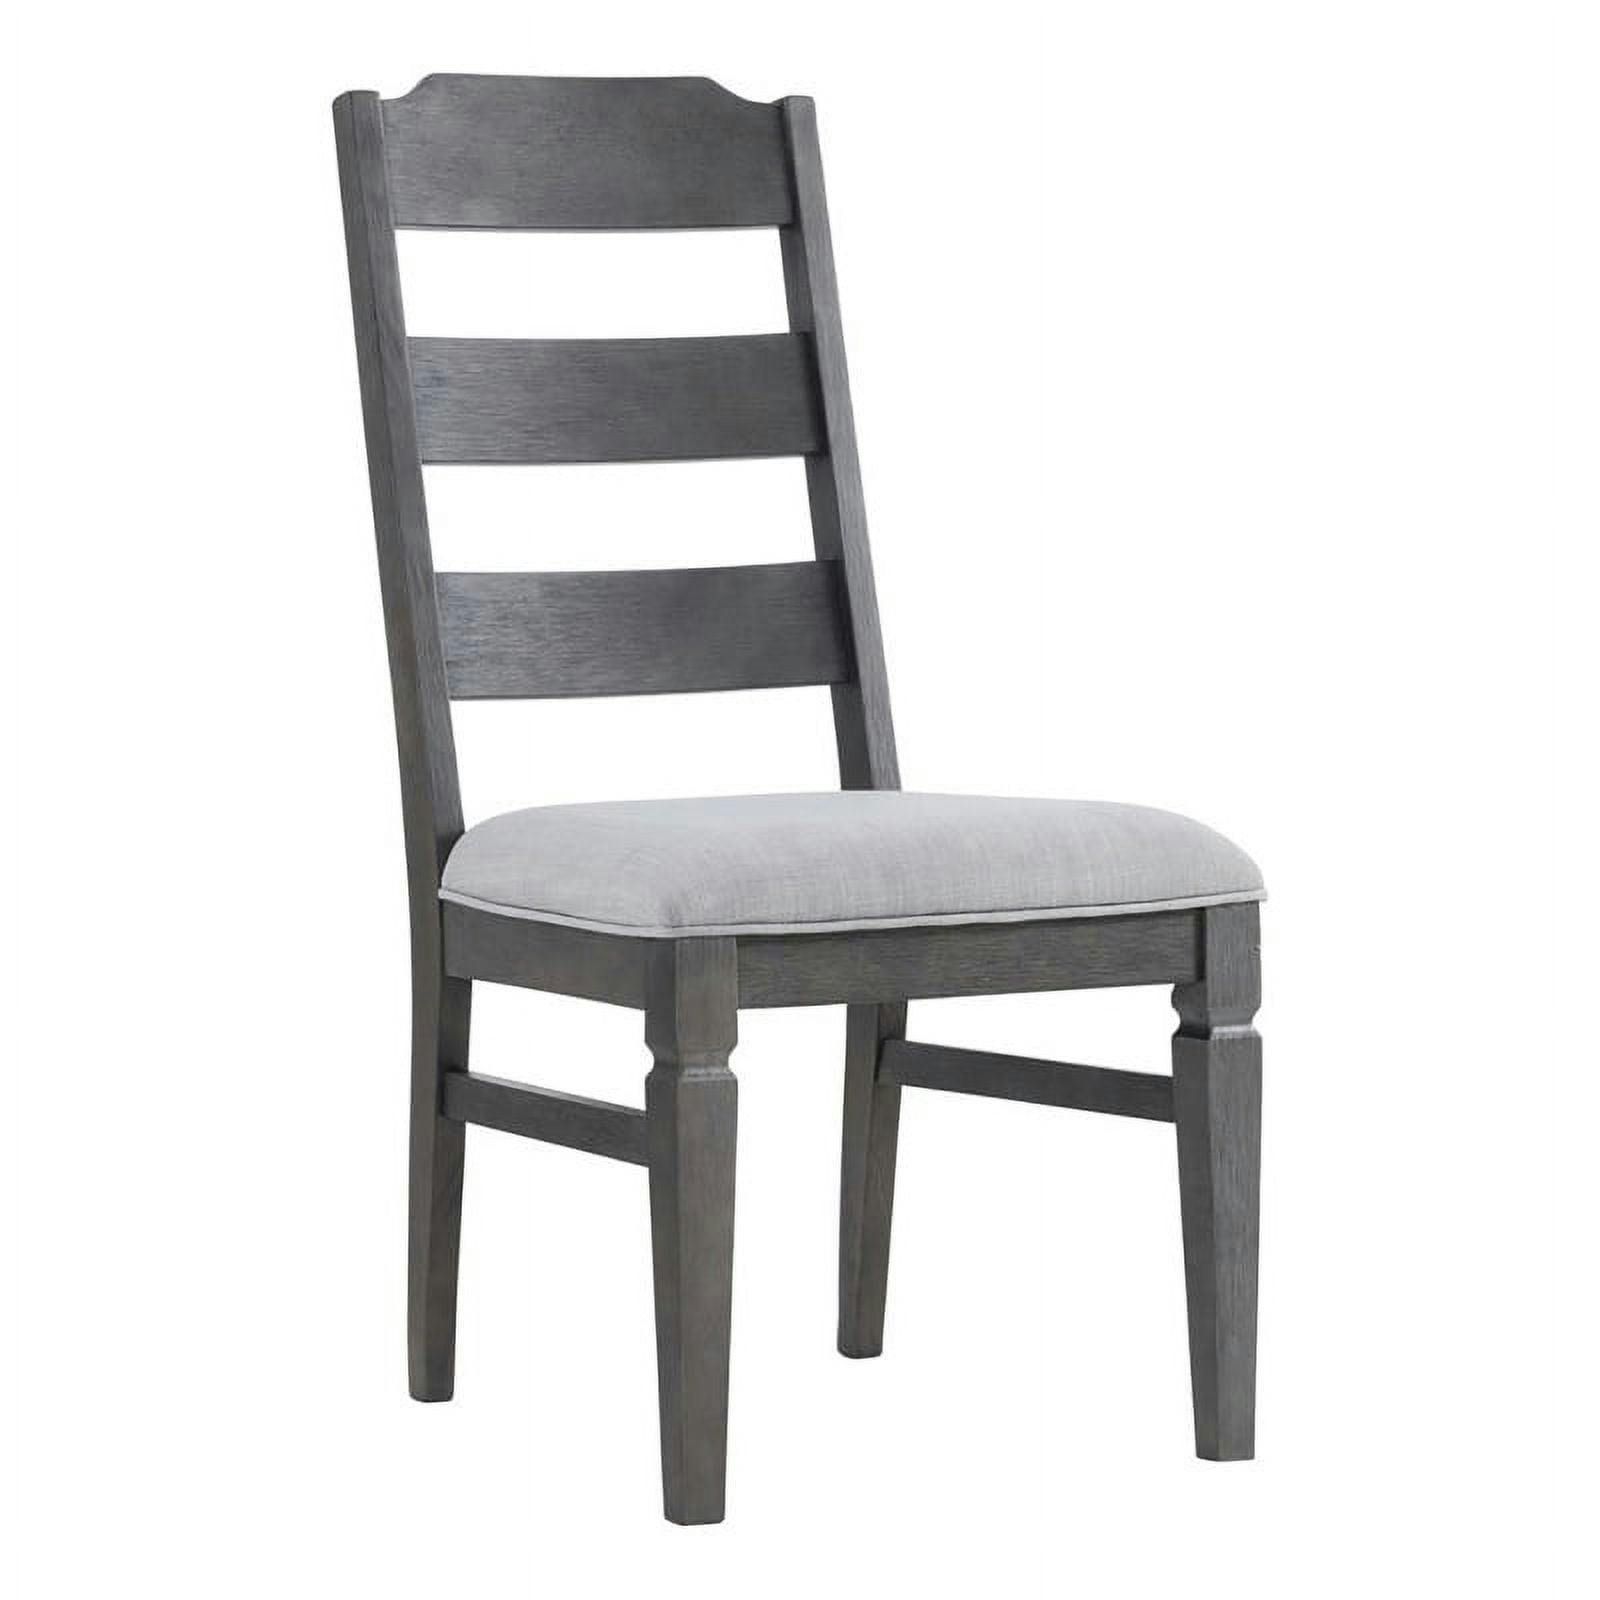 Transitional Pewter Gray Ladderback Side Chair with Cushion Seat